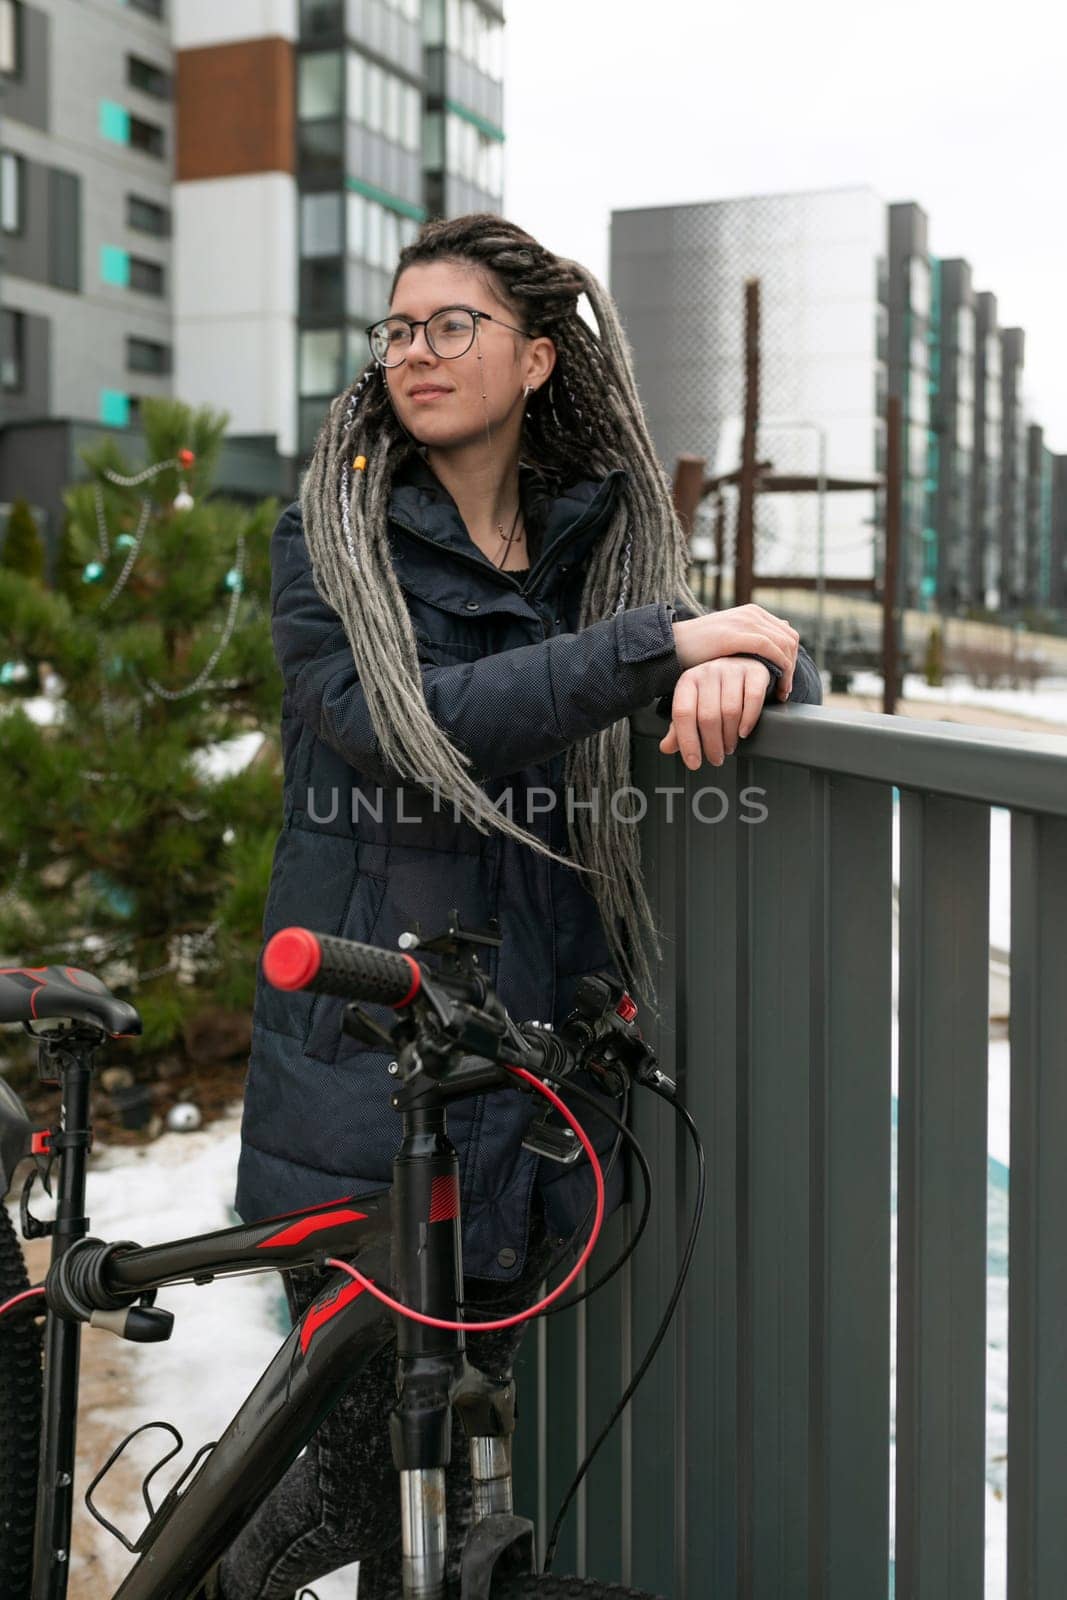 Bike rental concept, young european woman riding a bike around the city by TRMK